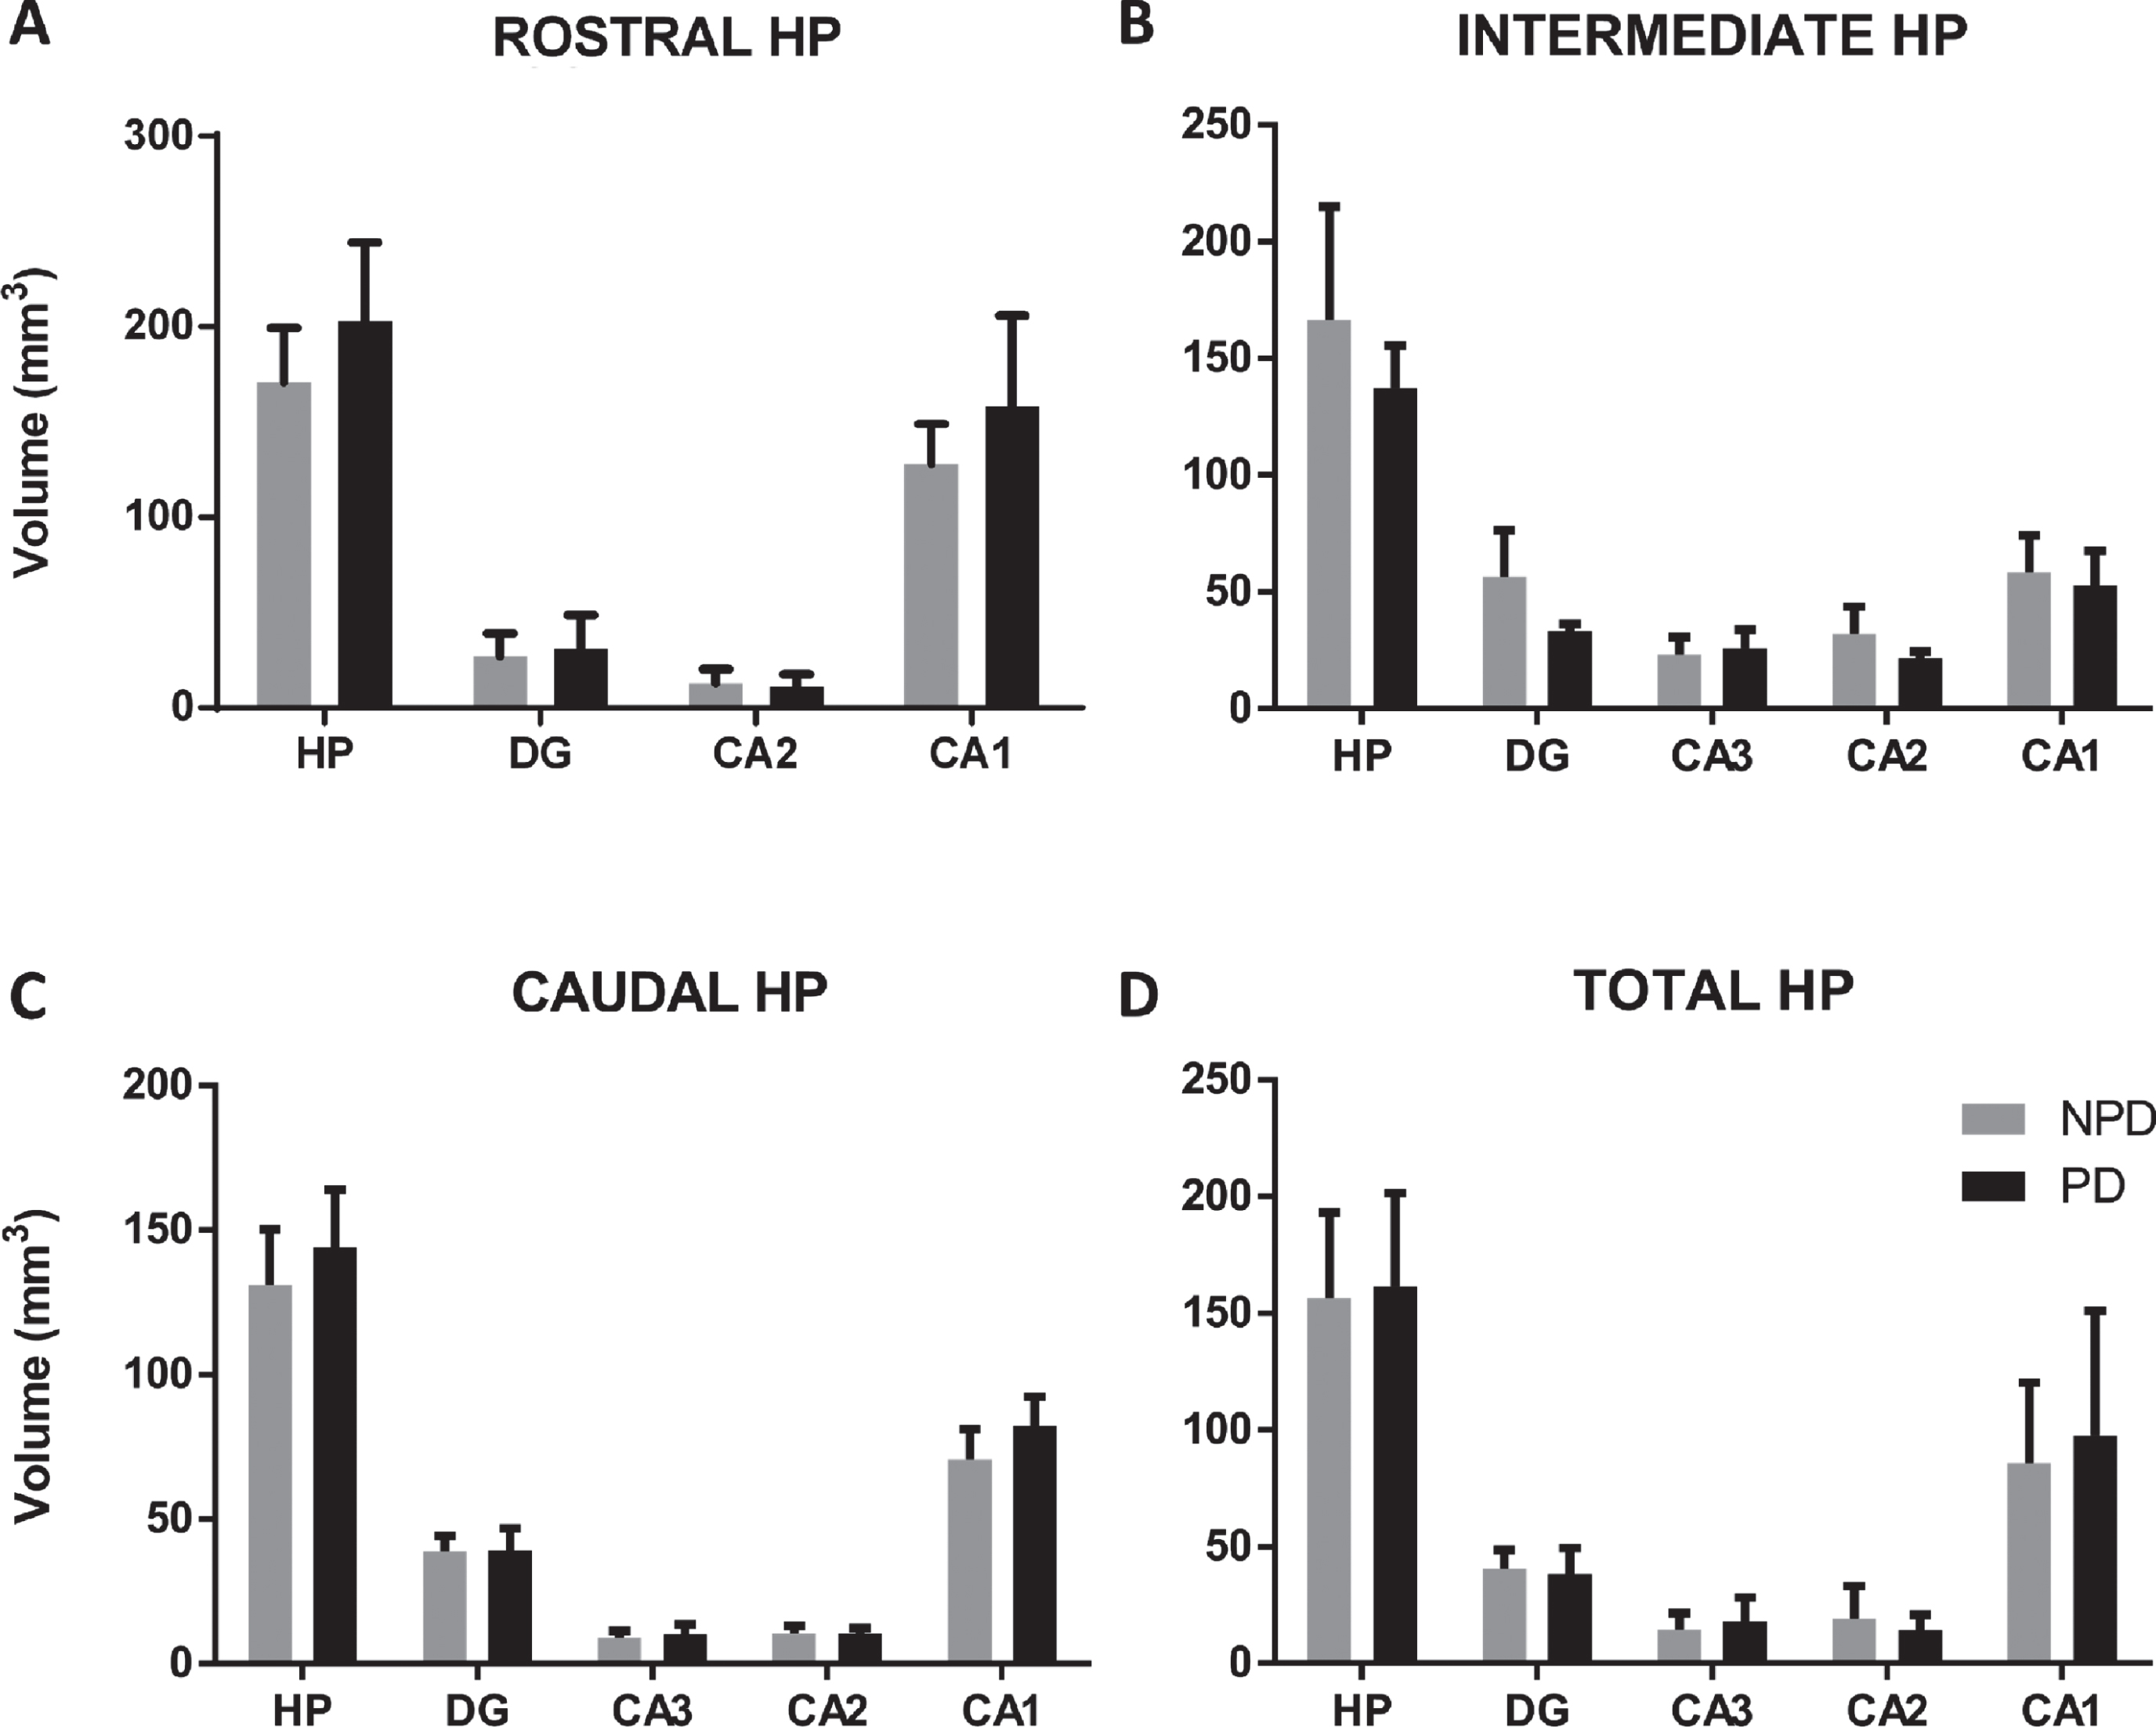 The mean±SD of the total volume of the hippocampus and hippocampal regions of the rostral (A), intermediate (B), caudal (C) and total (D) hippocampus in PD and NPD cases.